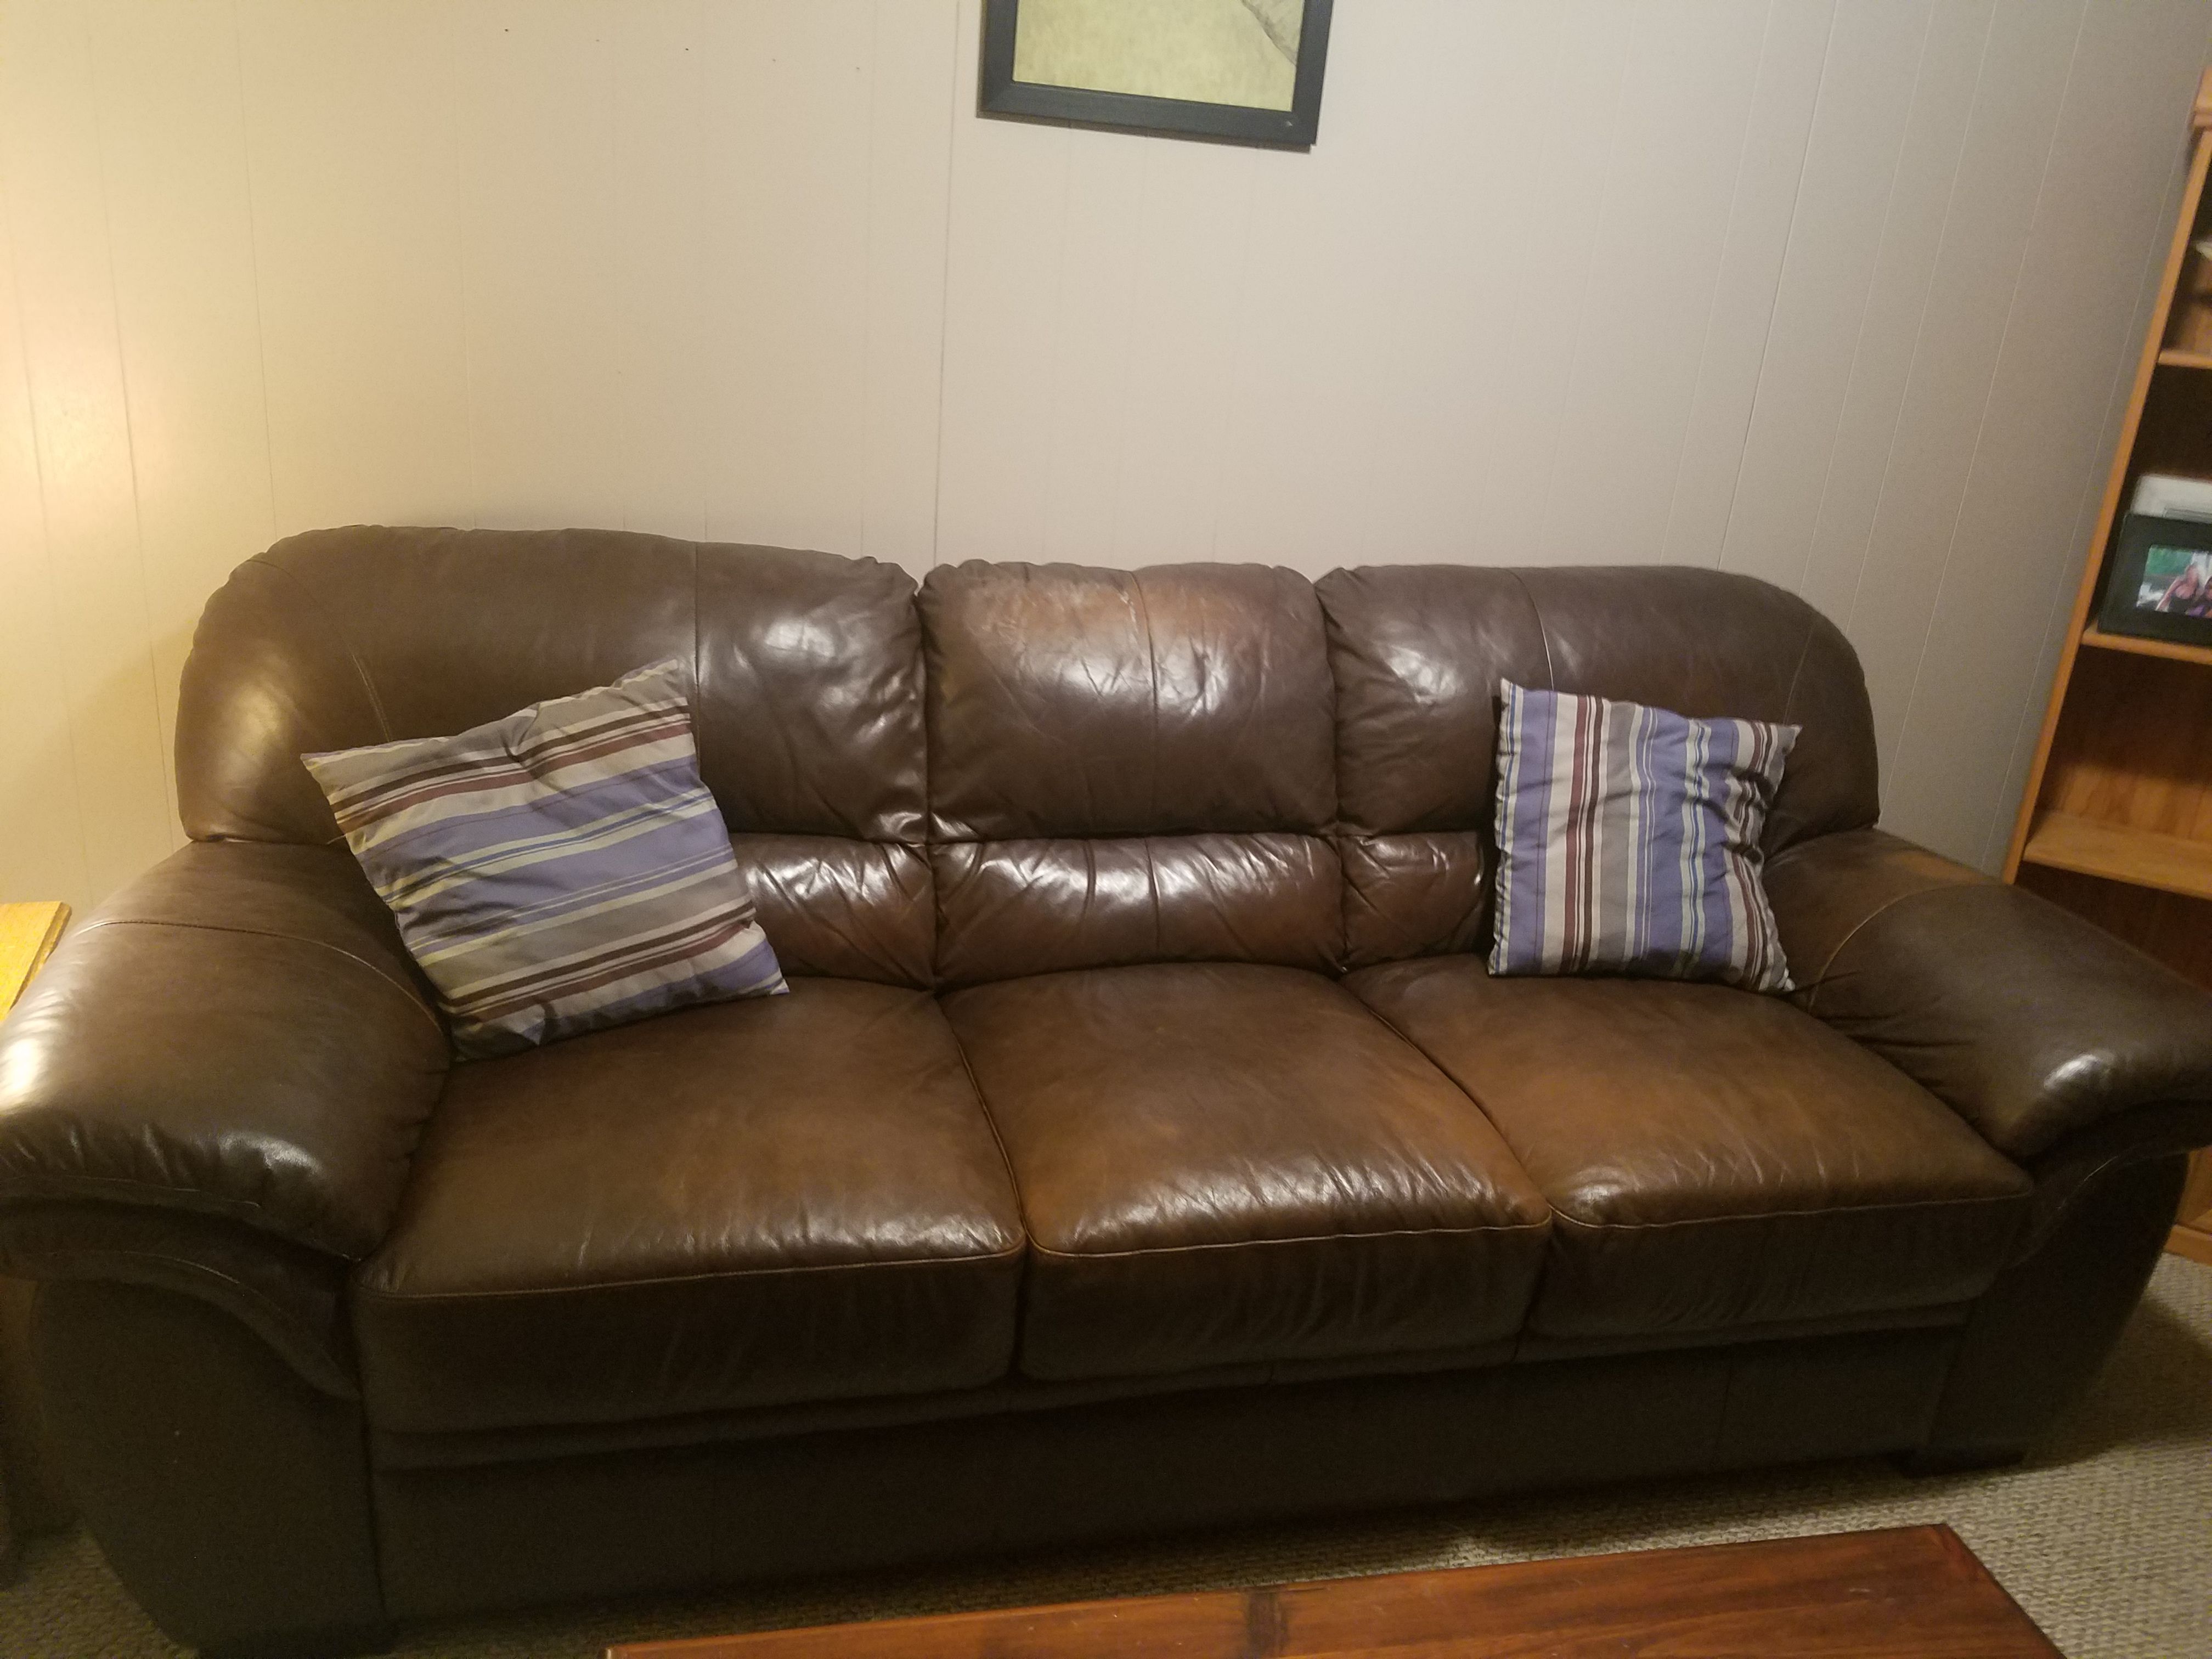 Brown leather sofa. Very solid. Got a newer sofa. Will be available for pickup next weekend. Serious inquires only please!